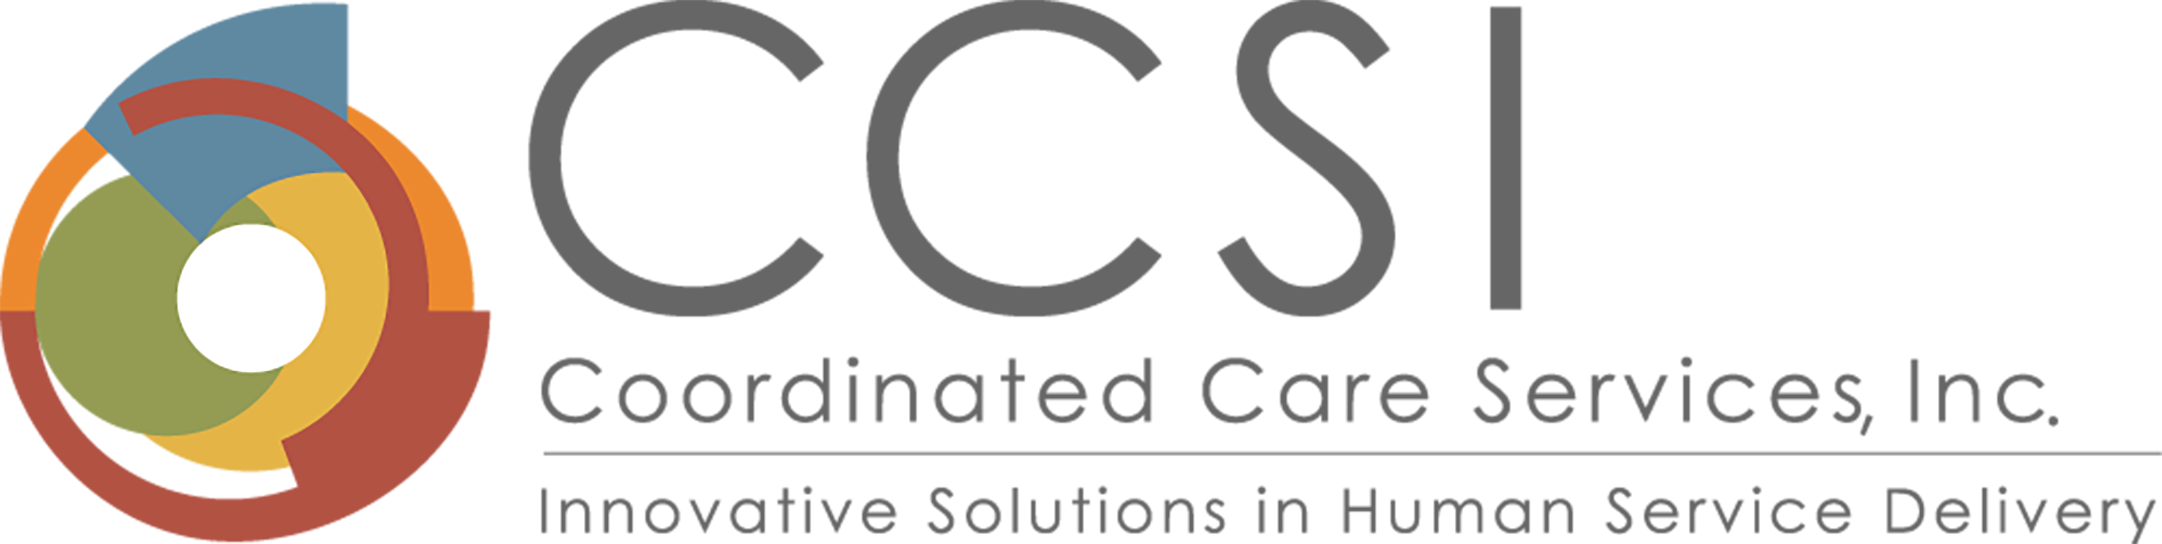 Coordinated Care Services Company Logo